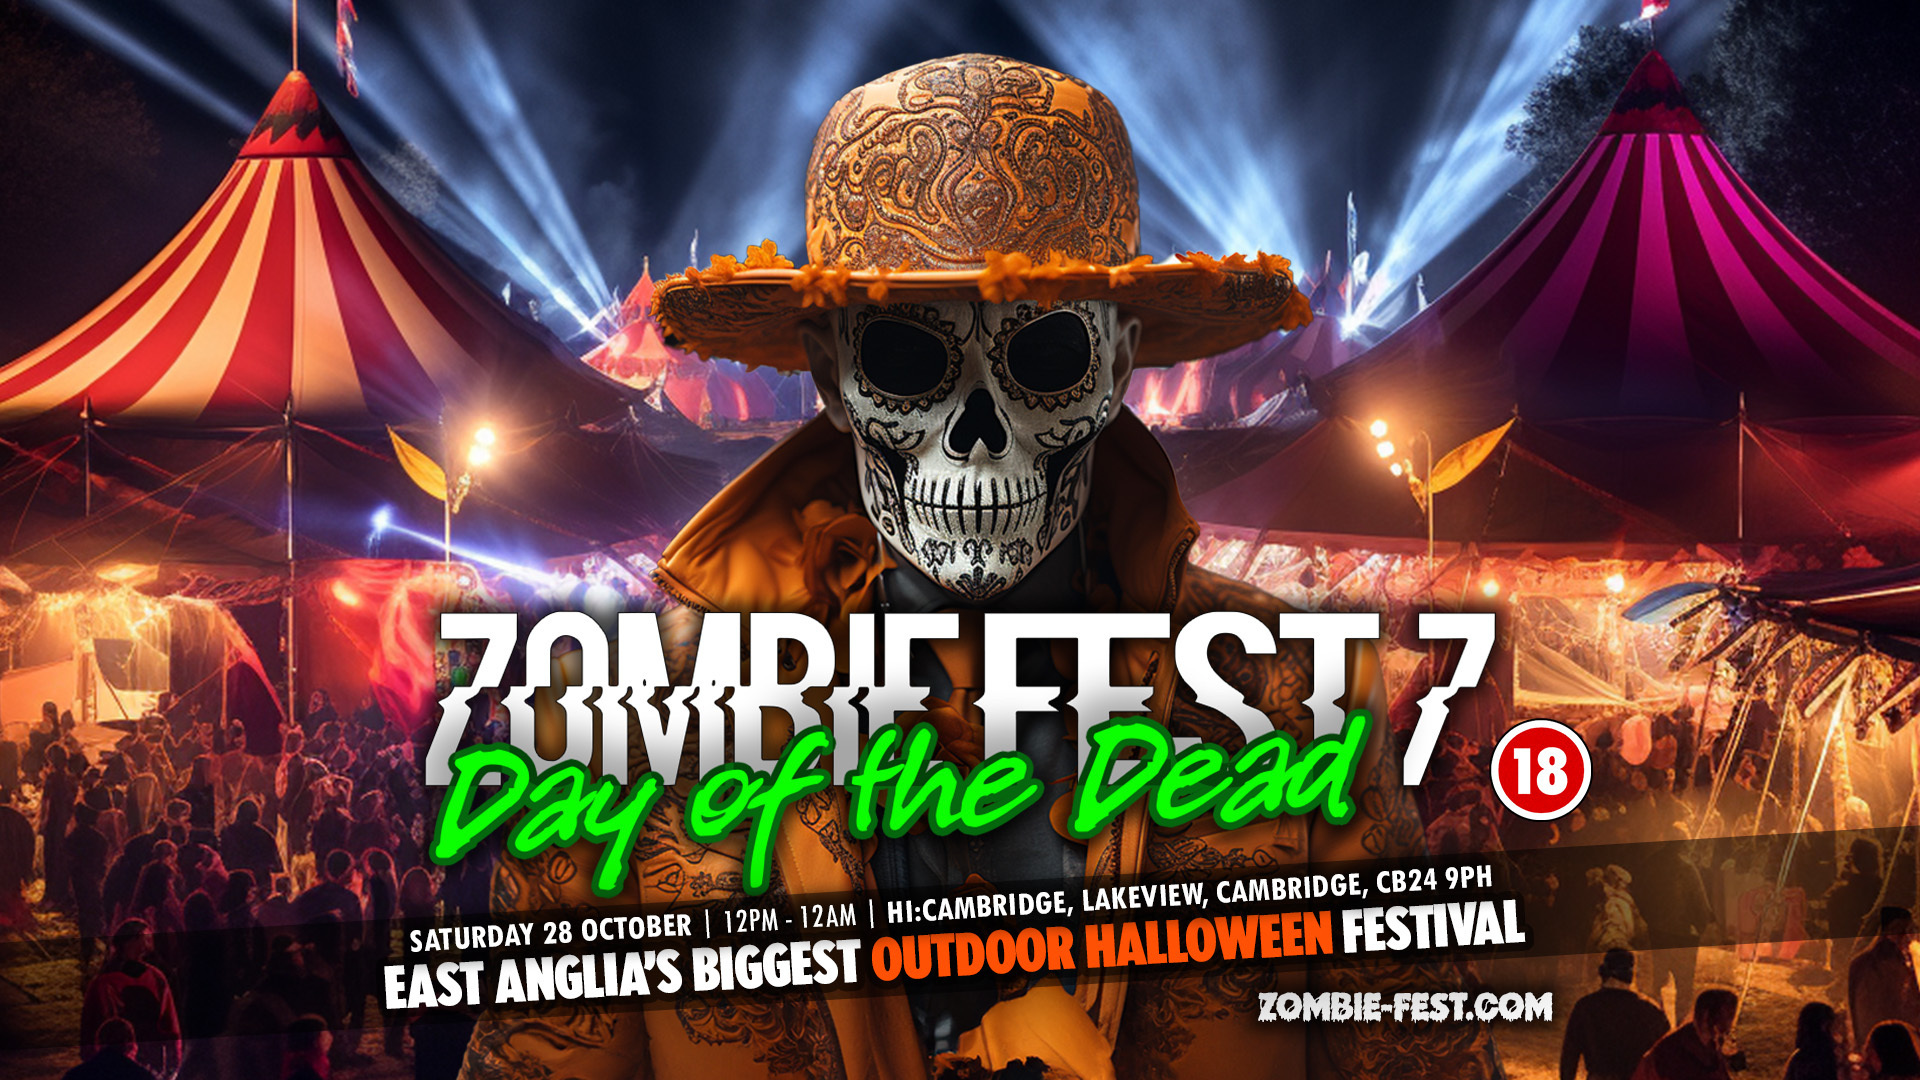 Zombie Fest 7 - Day of the Dead - Cambridge Halloween Festival feat. Andy C and Mark Knight!, Cambridge, England, United Kingdom